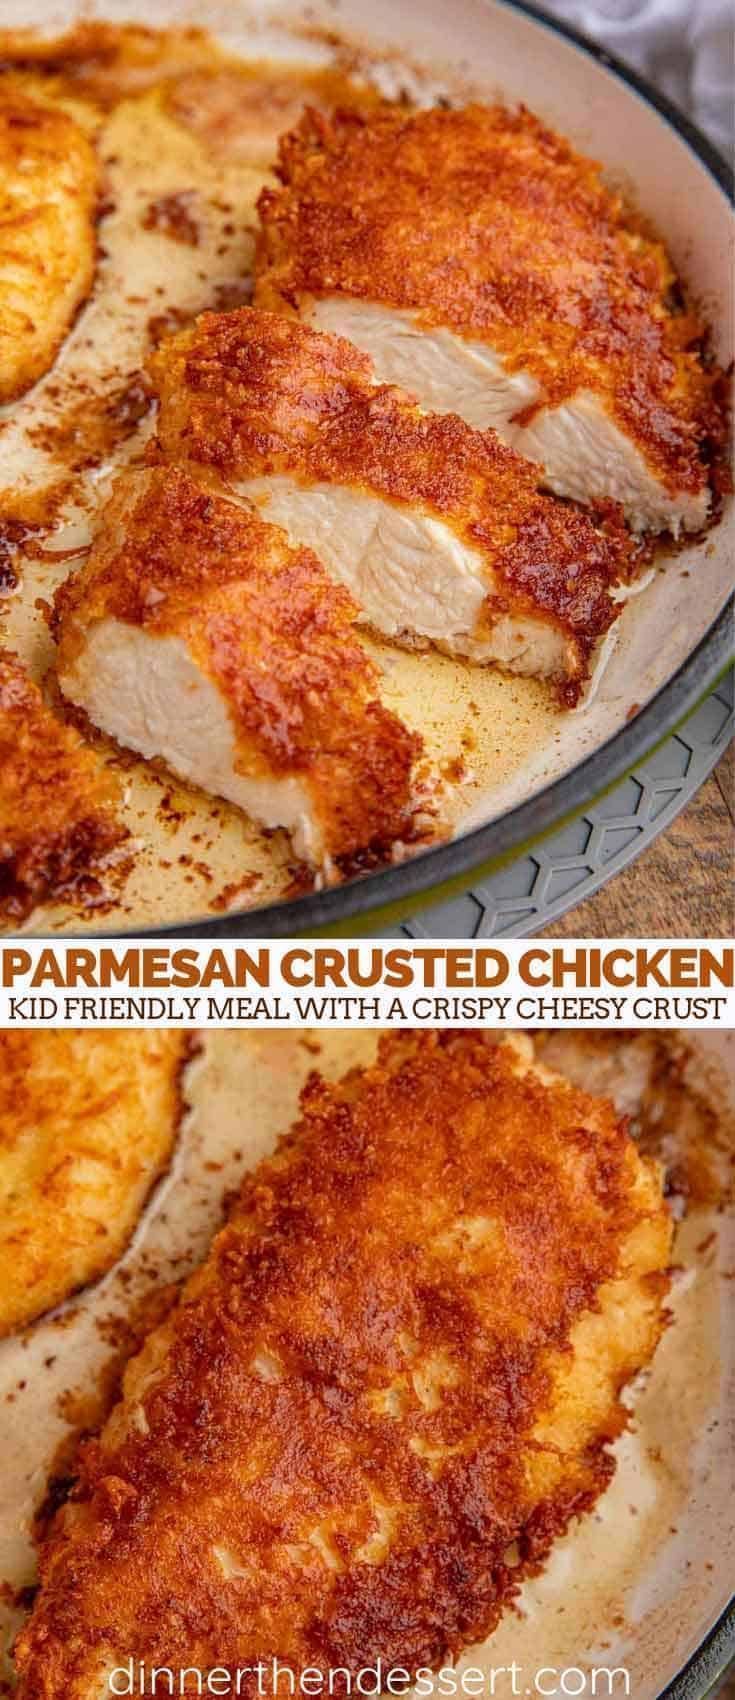 Ultimate Parmesan Crusted Chicken (5 mins prep!) - Dinner, then Dessert - Ultimate Parmesan Crusted Chicken (5 mins prep!) - Dinner, then Dessert -   18 dinner recipes for two chicken ideas